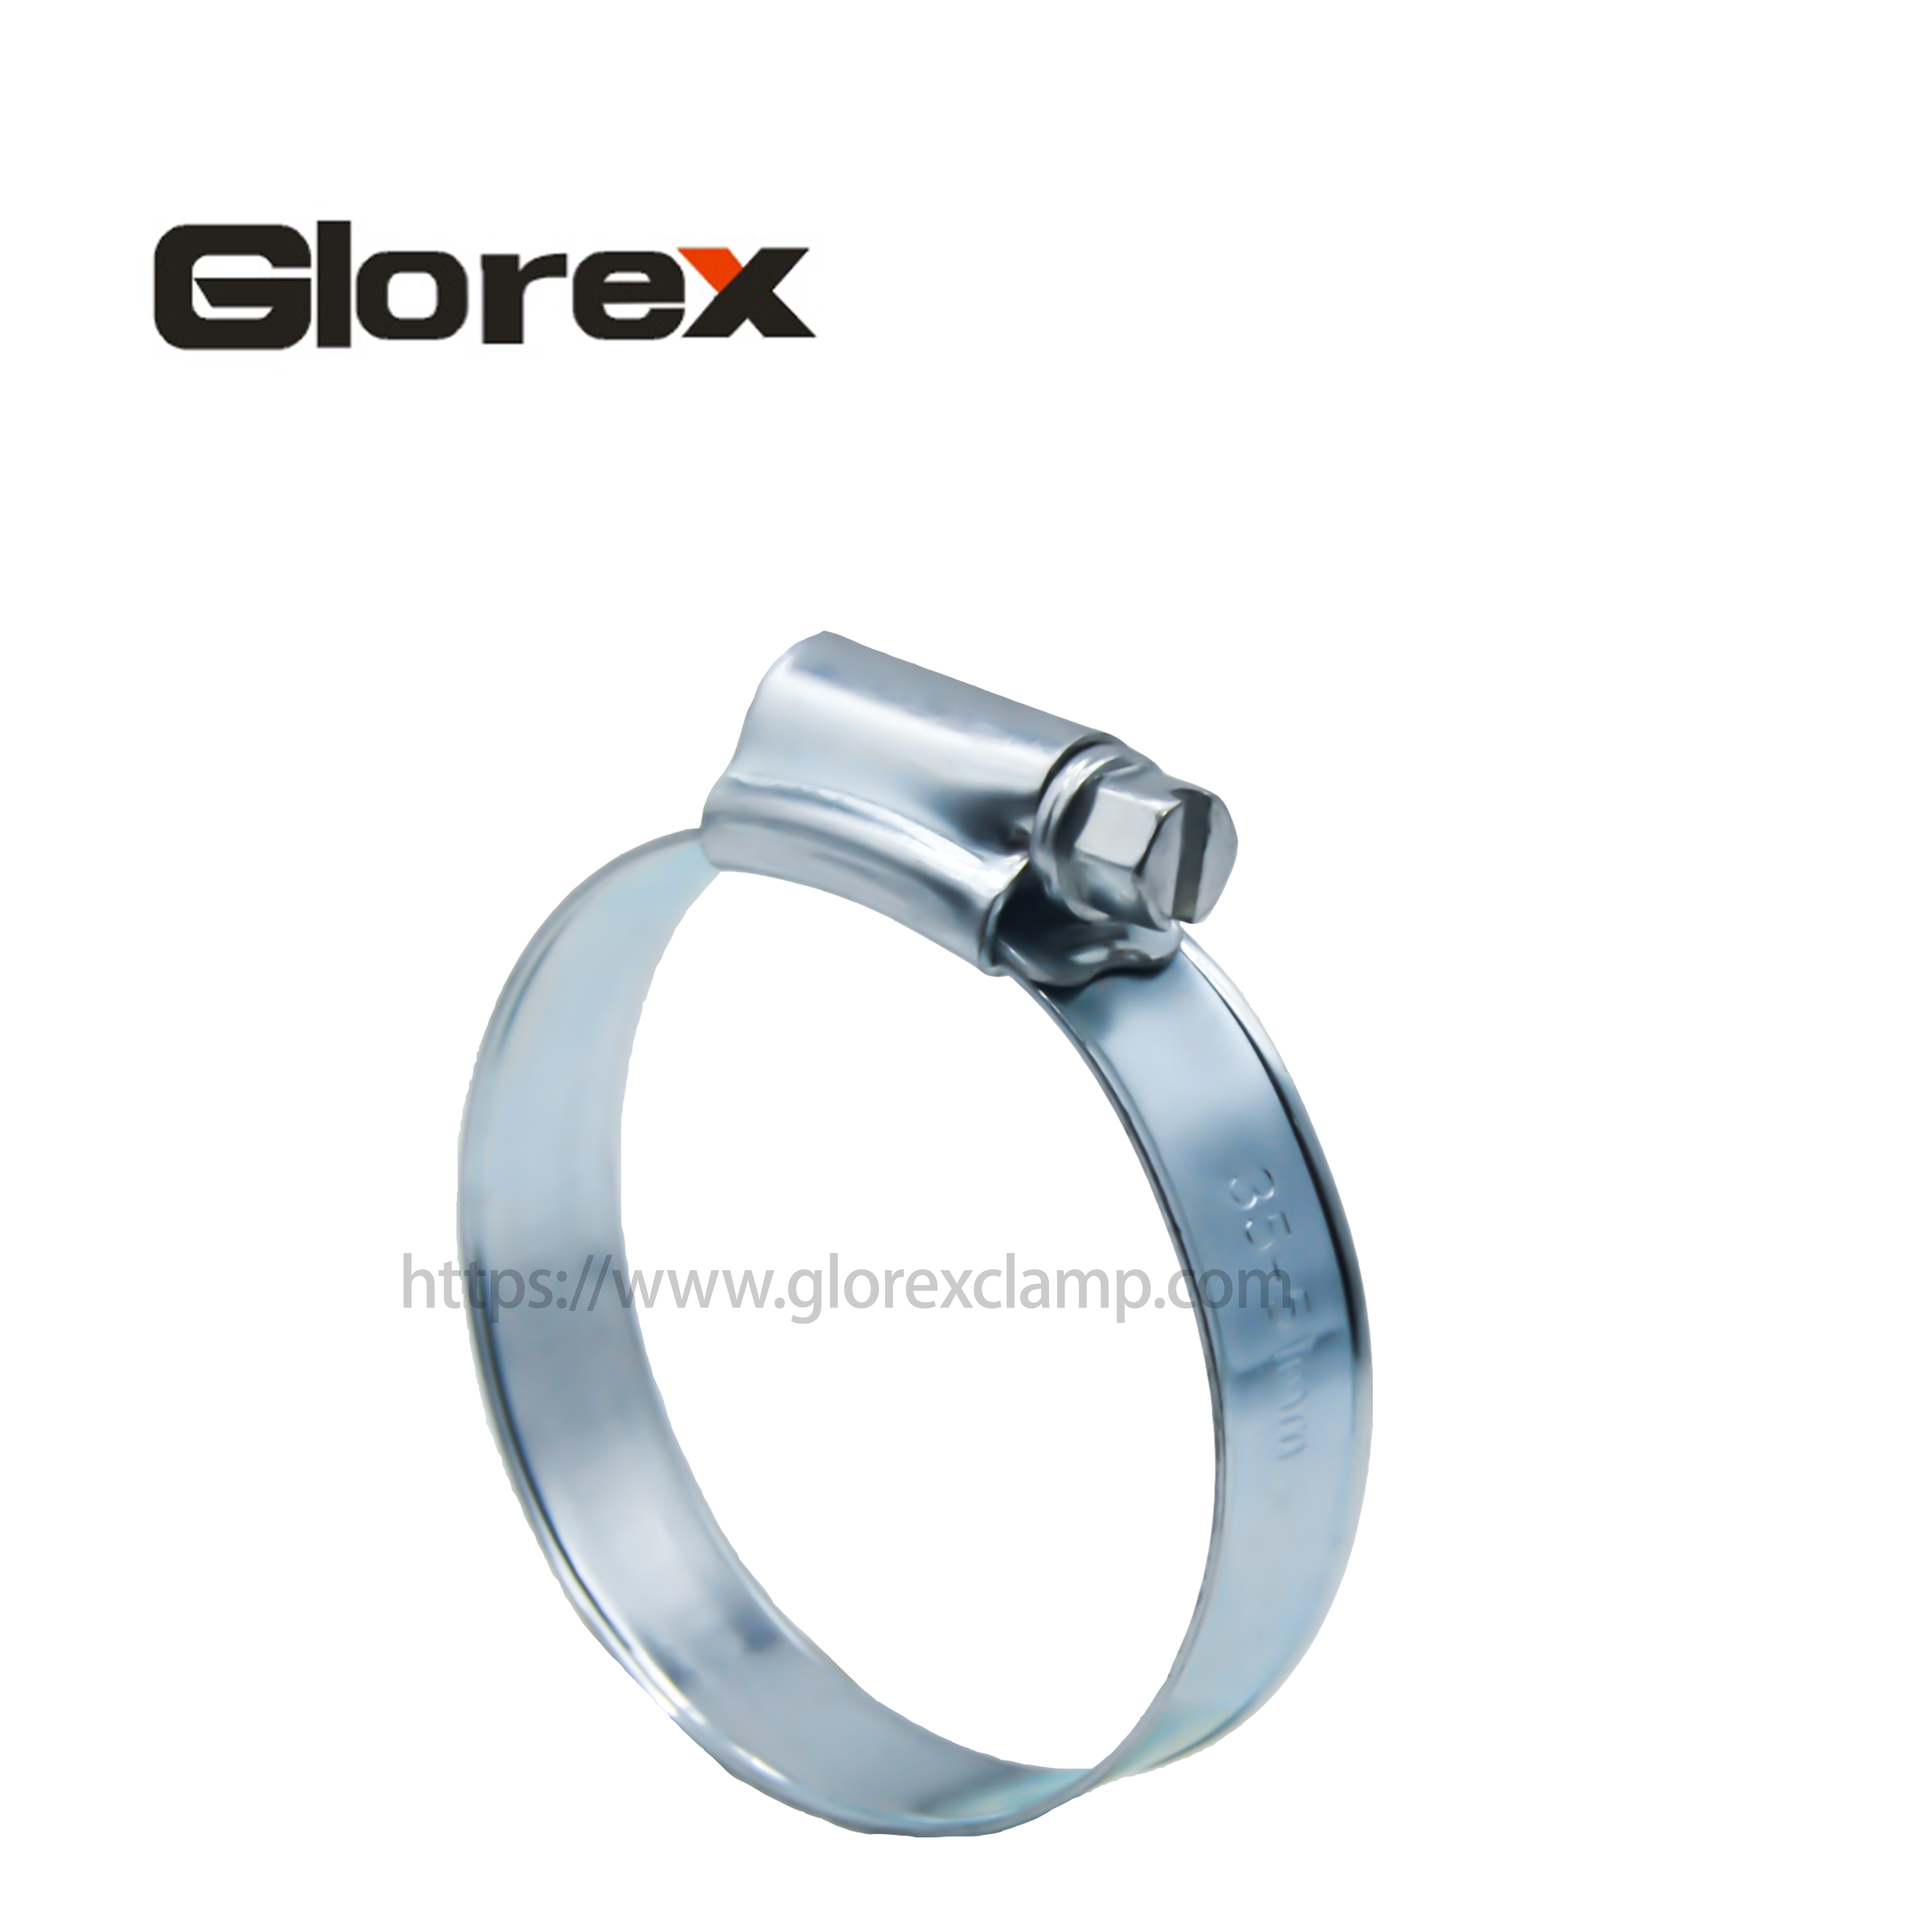 Reasonable price for Super Clamp Hose Clamp - British type hose clamp with welding – Glorex